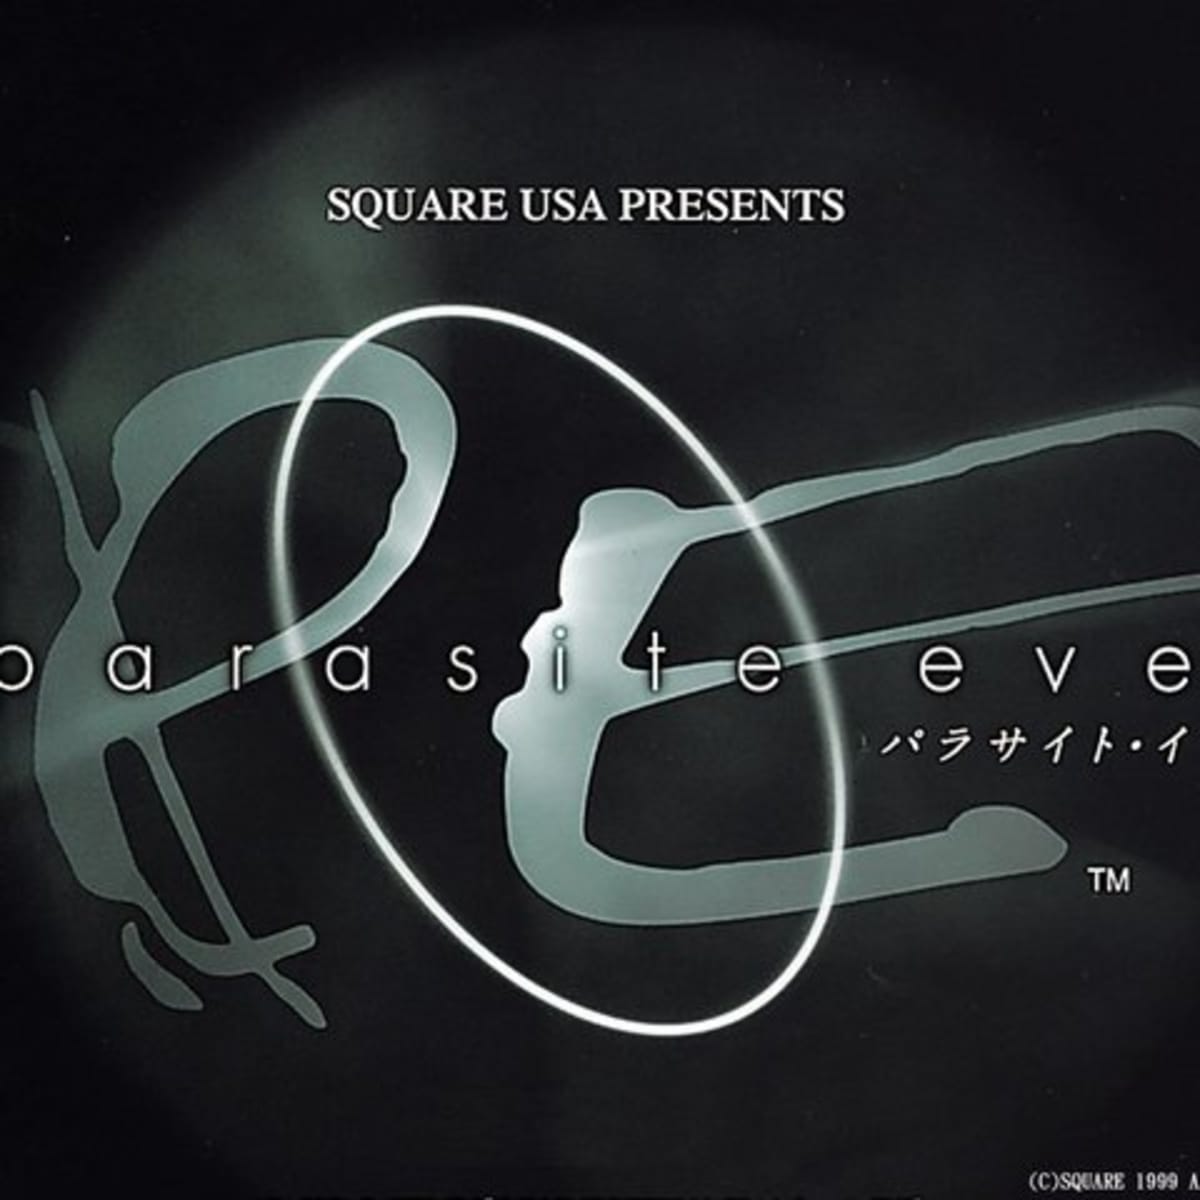 New Square Enix trademark points to Parasite Eve